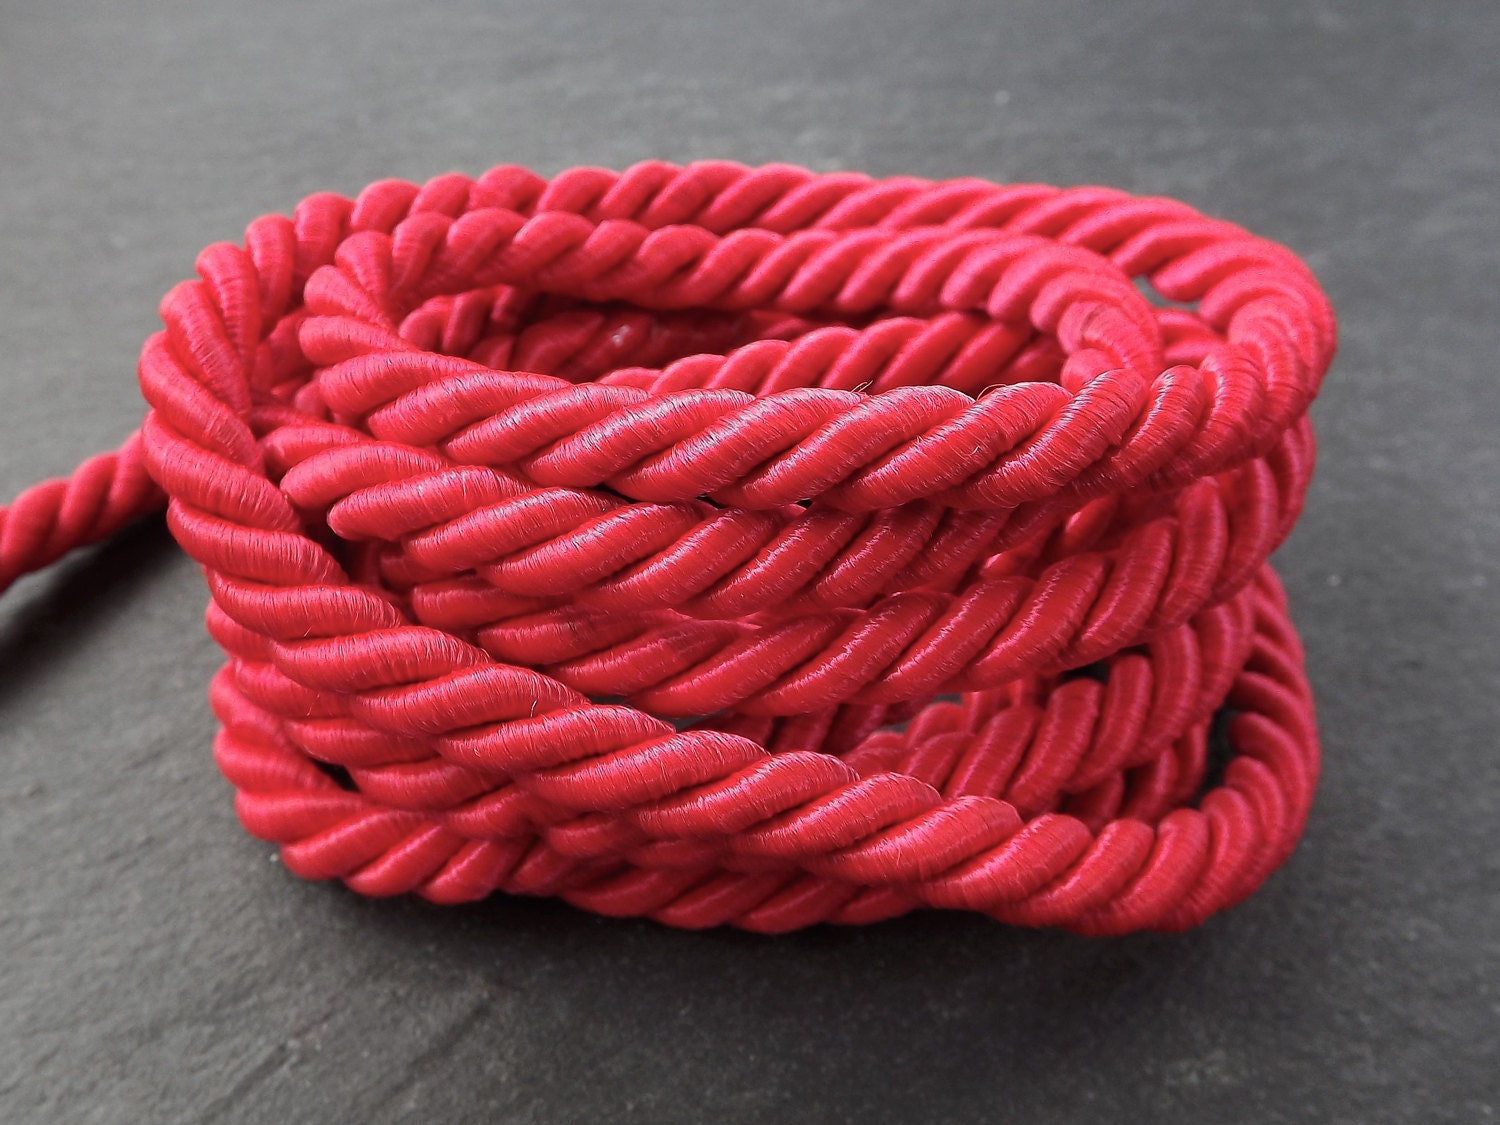 Cardinal Red Rope 7mm Twisted Rayon Satin Rope Silk Braid Cord - 3